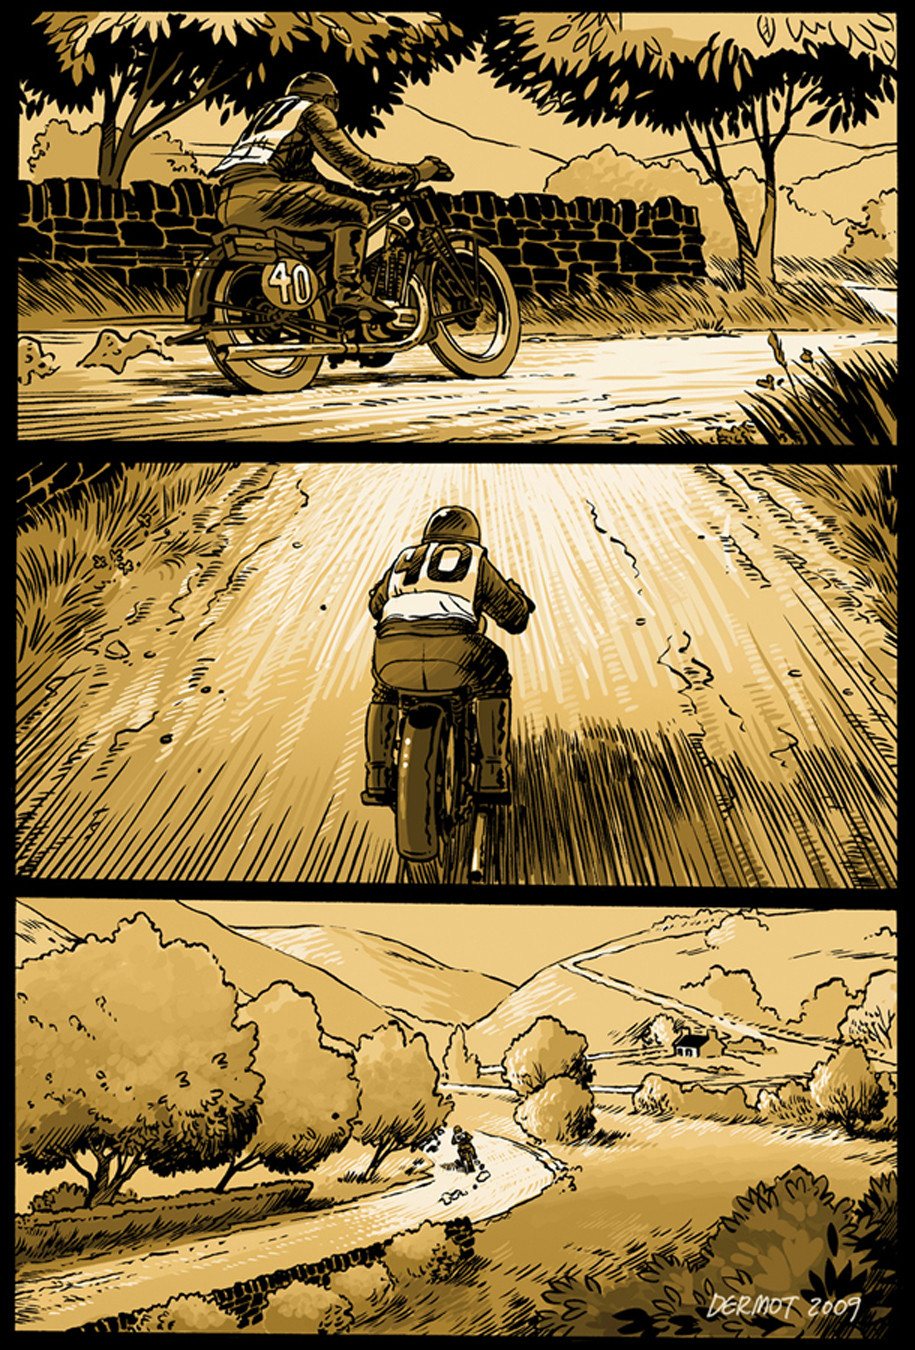 A page from my graphic story for Flight called "TT Challenge"